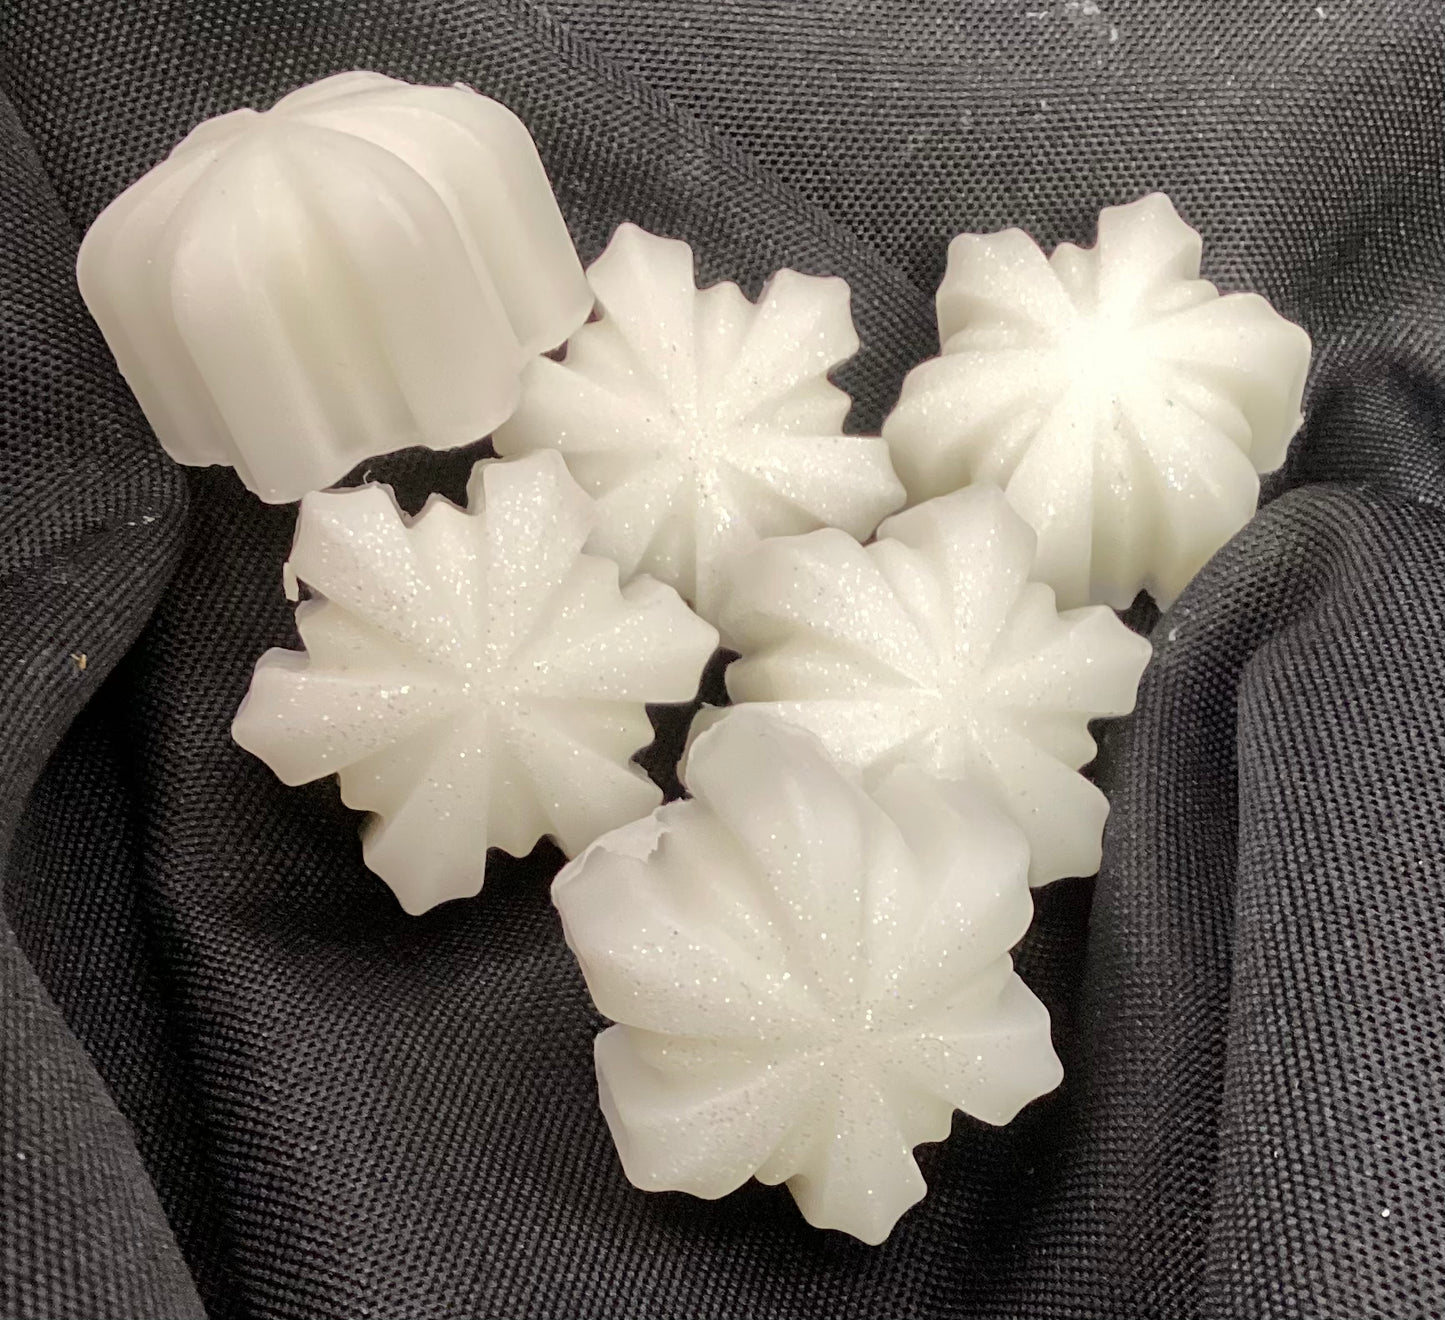 Small Snowflake shaped Whited Christmas scented  Goats Milk soap with sparkles!  

$1

Each item is individually made and may appear different from the photo.